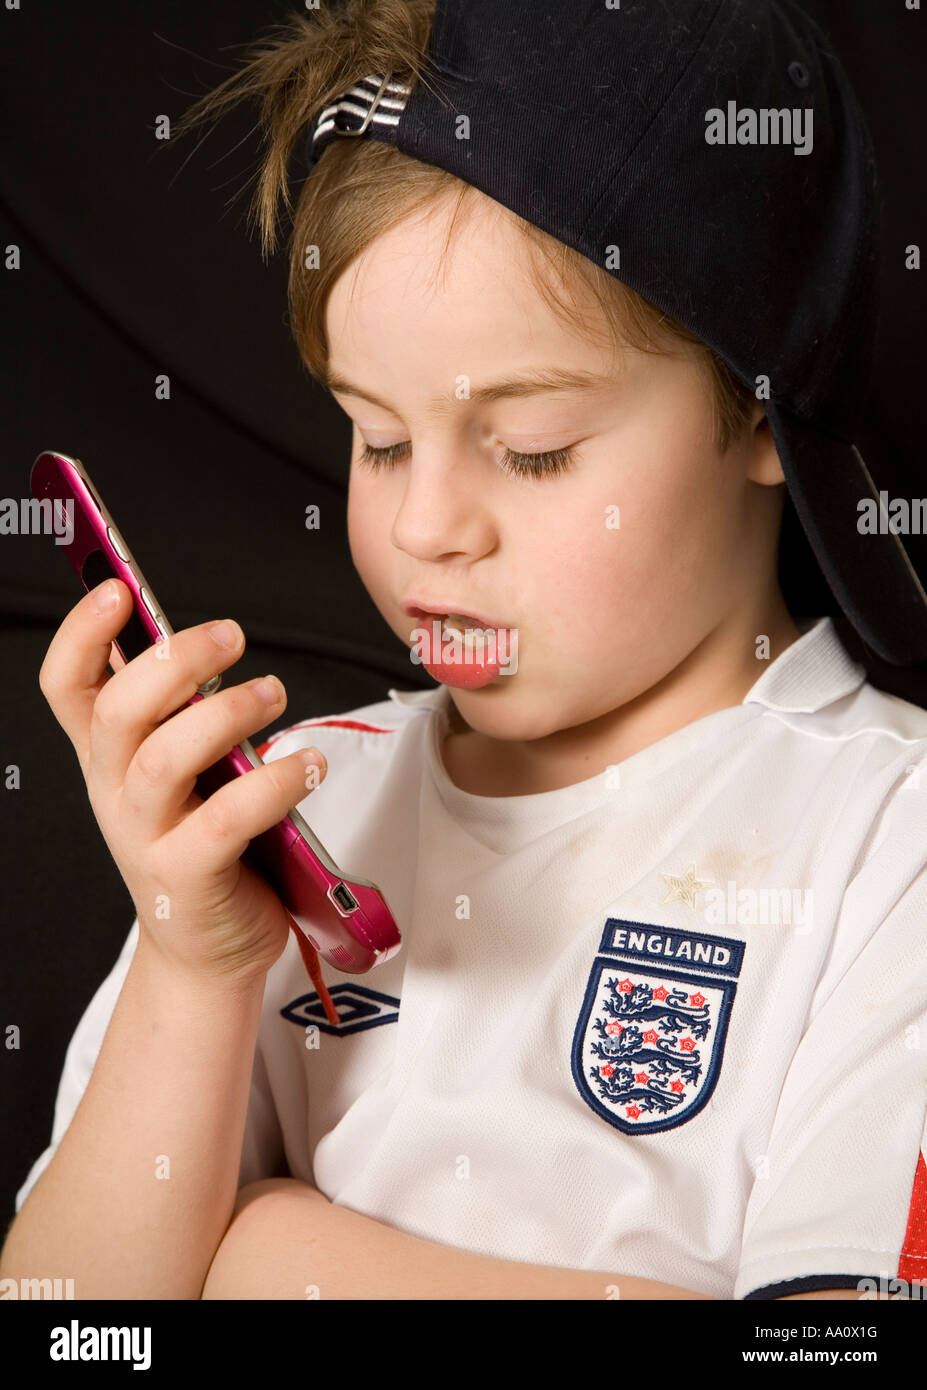 Face of a young boy wearing a reversed baseball cap speaking into a cell phone Stock Photo